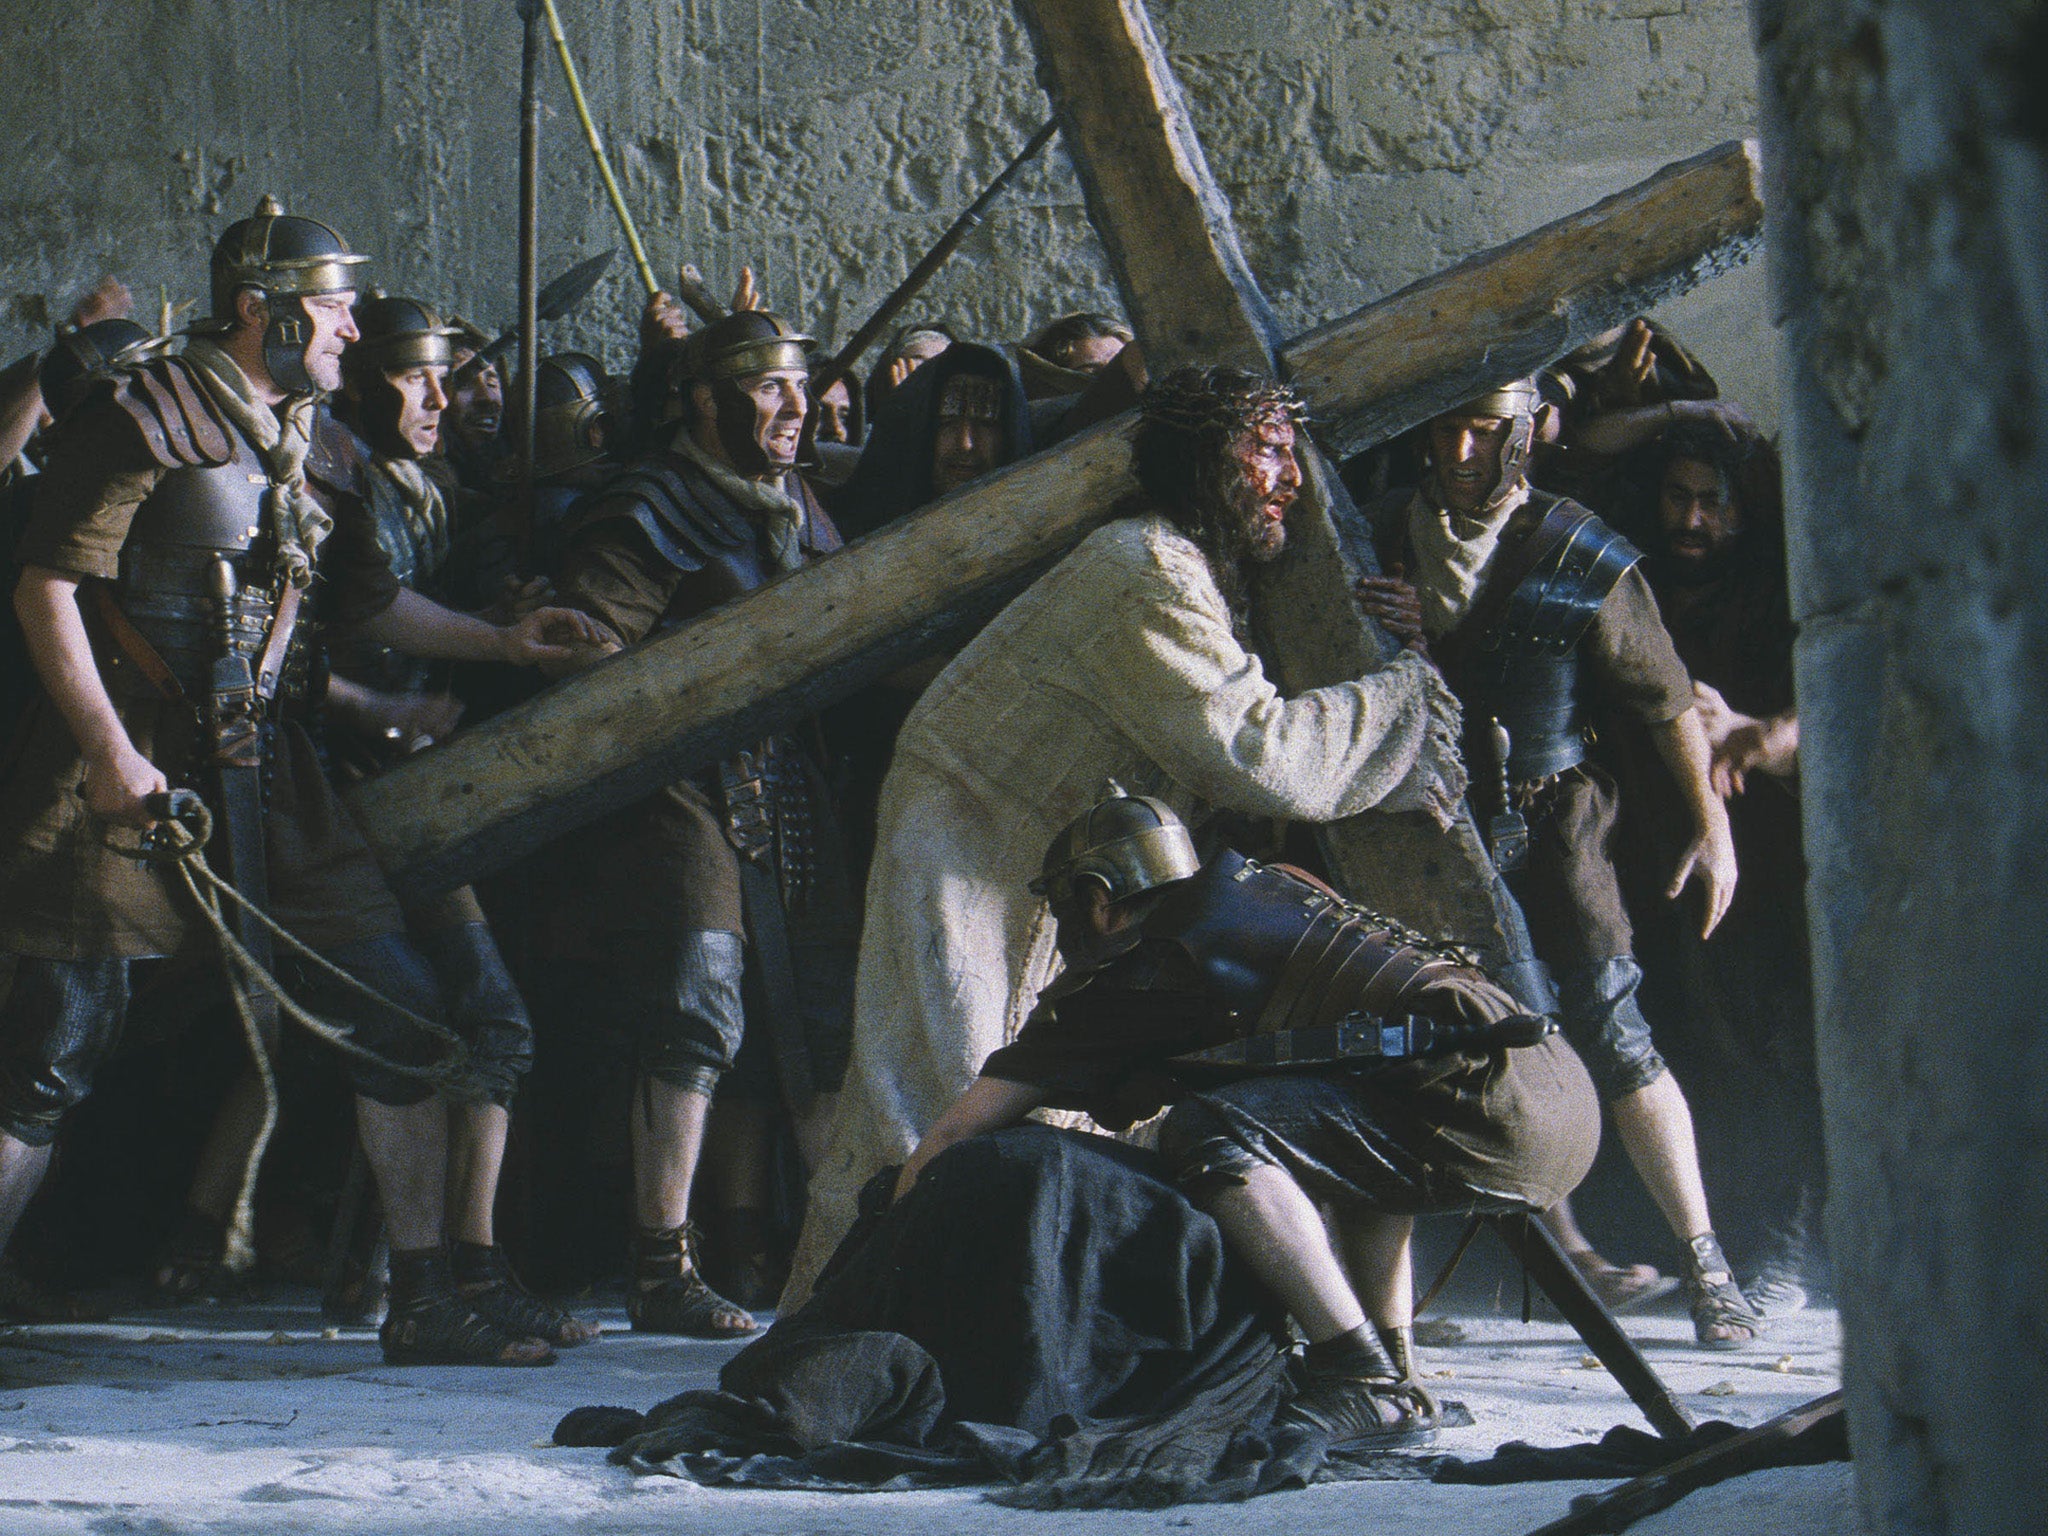 Jim Caviezel as Jesus in ‘The Passion Of The Christ’ (2004)